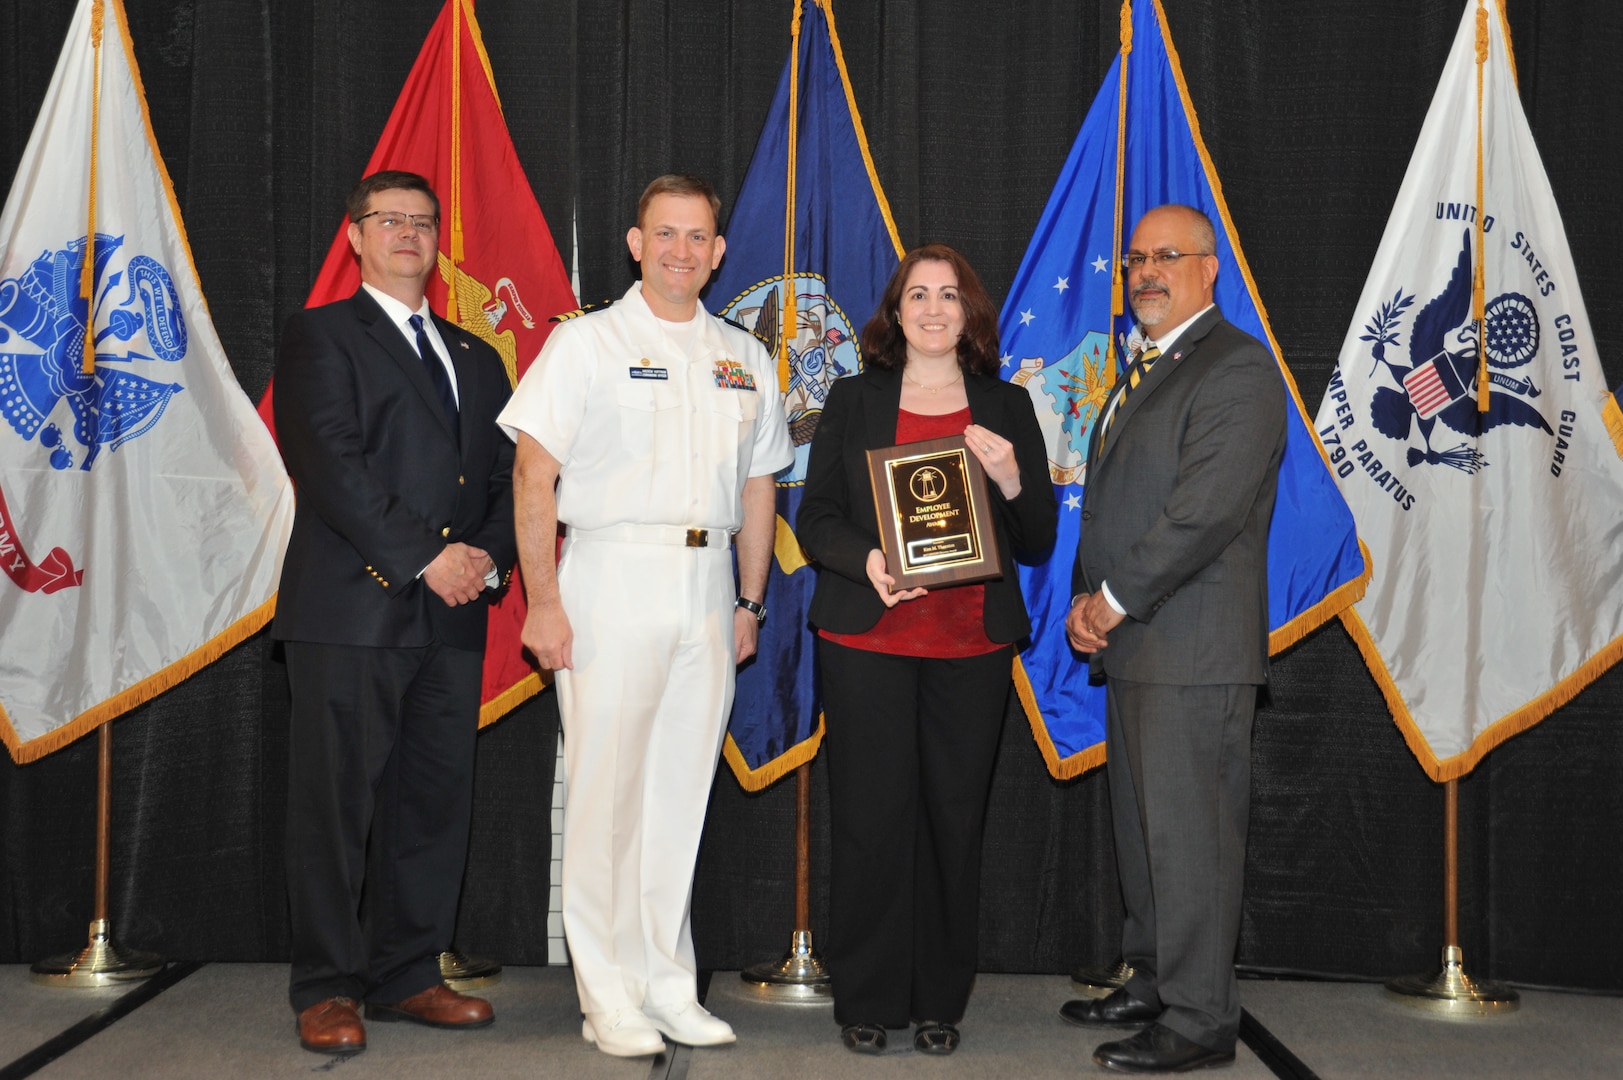 IMAGE:Kim Thorton is presented the Employee Development Award at Naval Surface Warfare Center Dahlgren Division's annual awards ceremony, Apr. 26 at the Fredericksburg Expo and Conference Center.

The Employee Development Award was established to recognize those individuals who – through their leadership and commitment – have made exemplary contributions to the development of others.